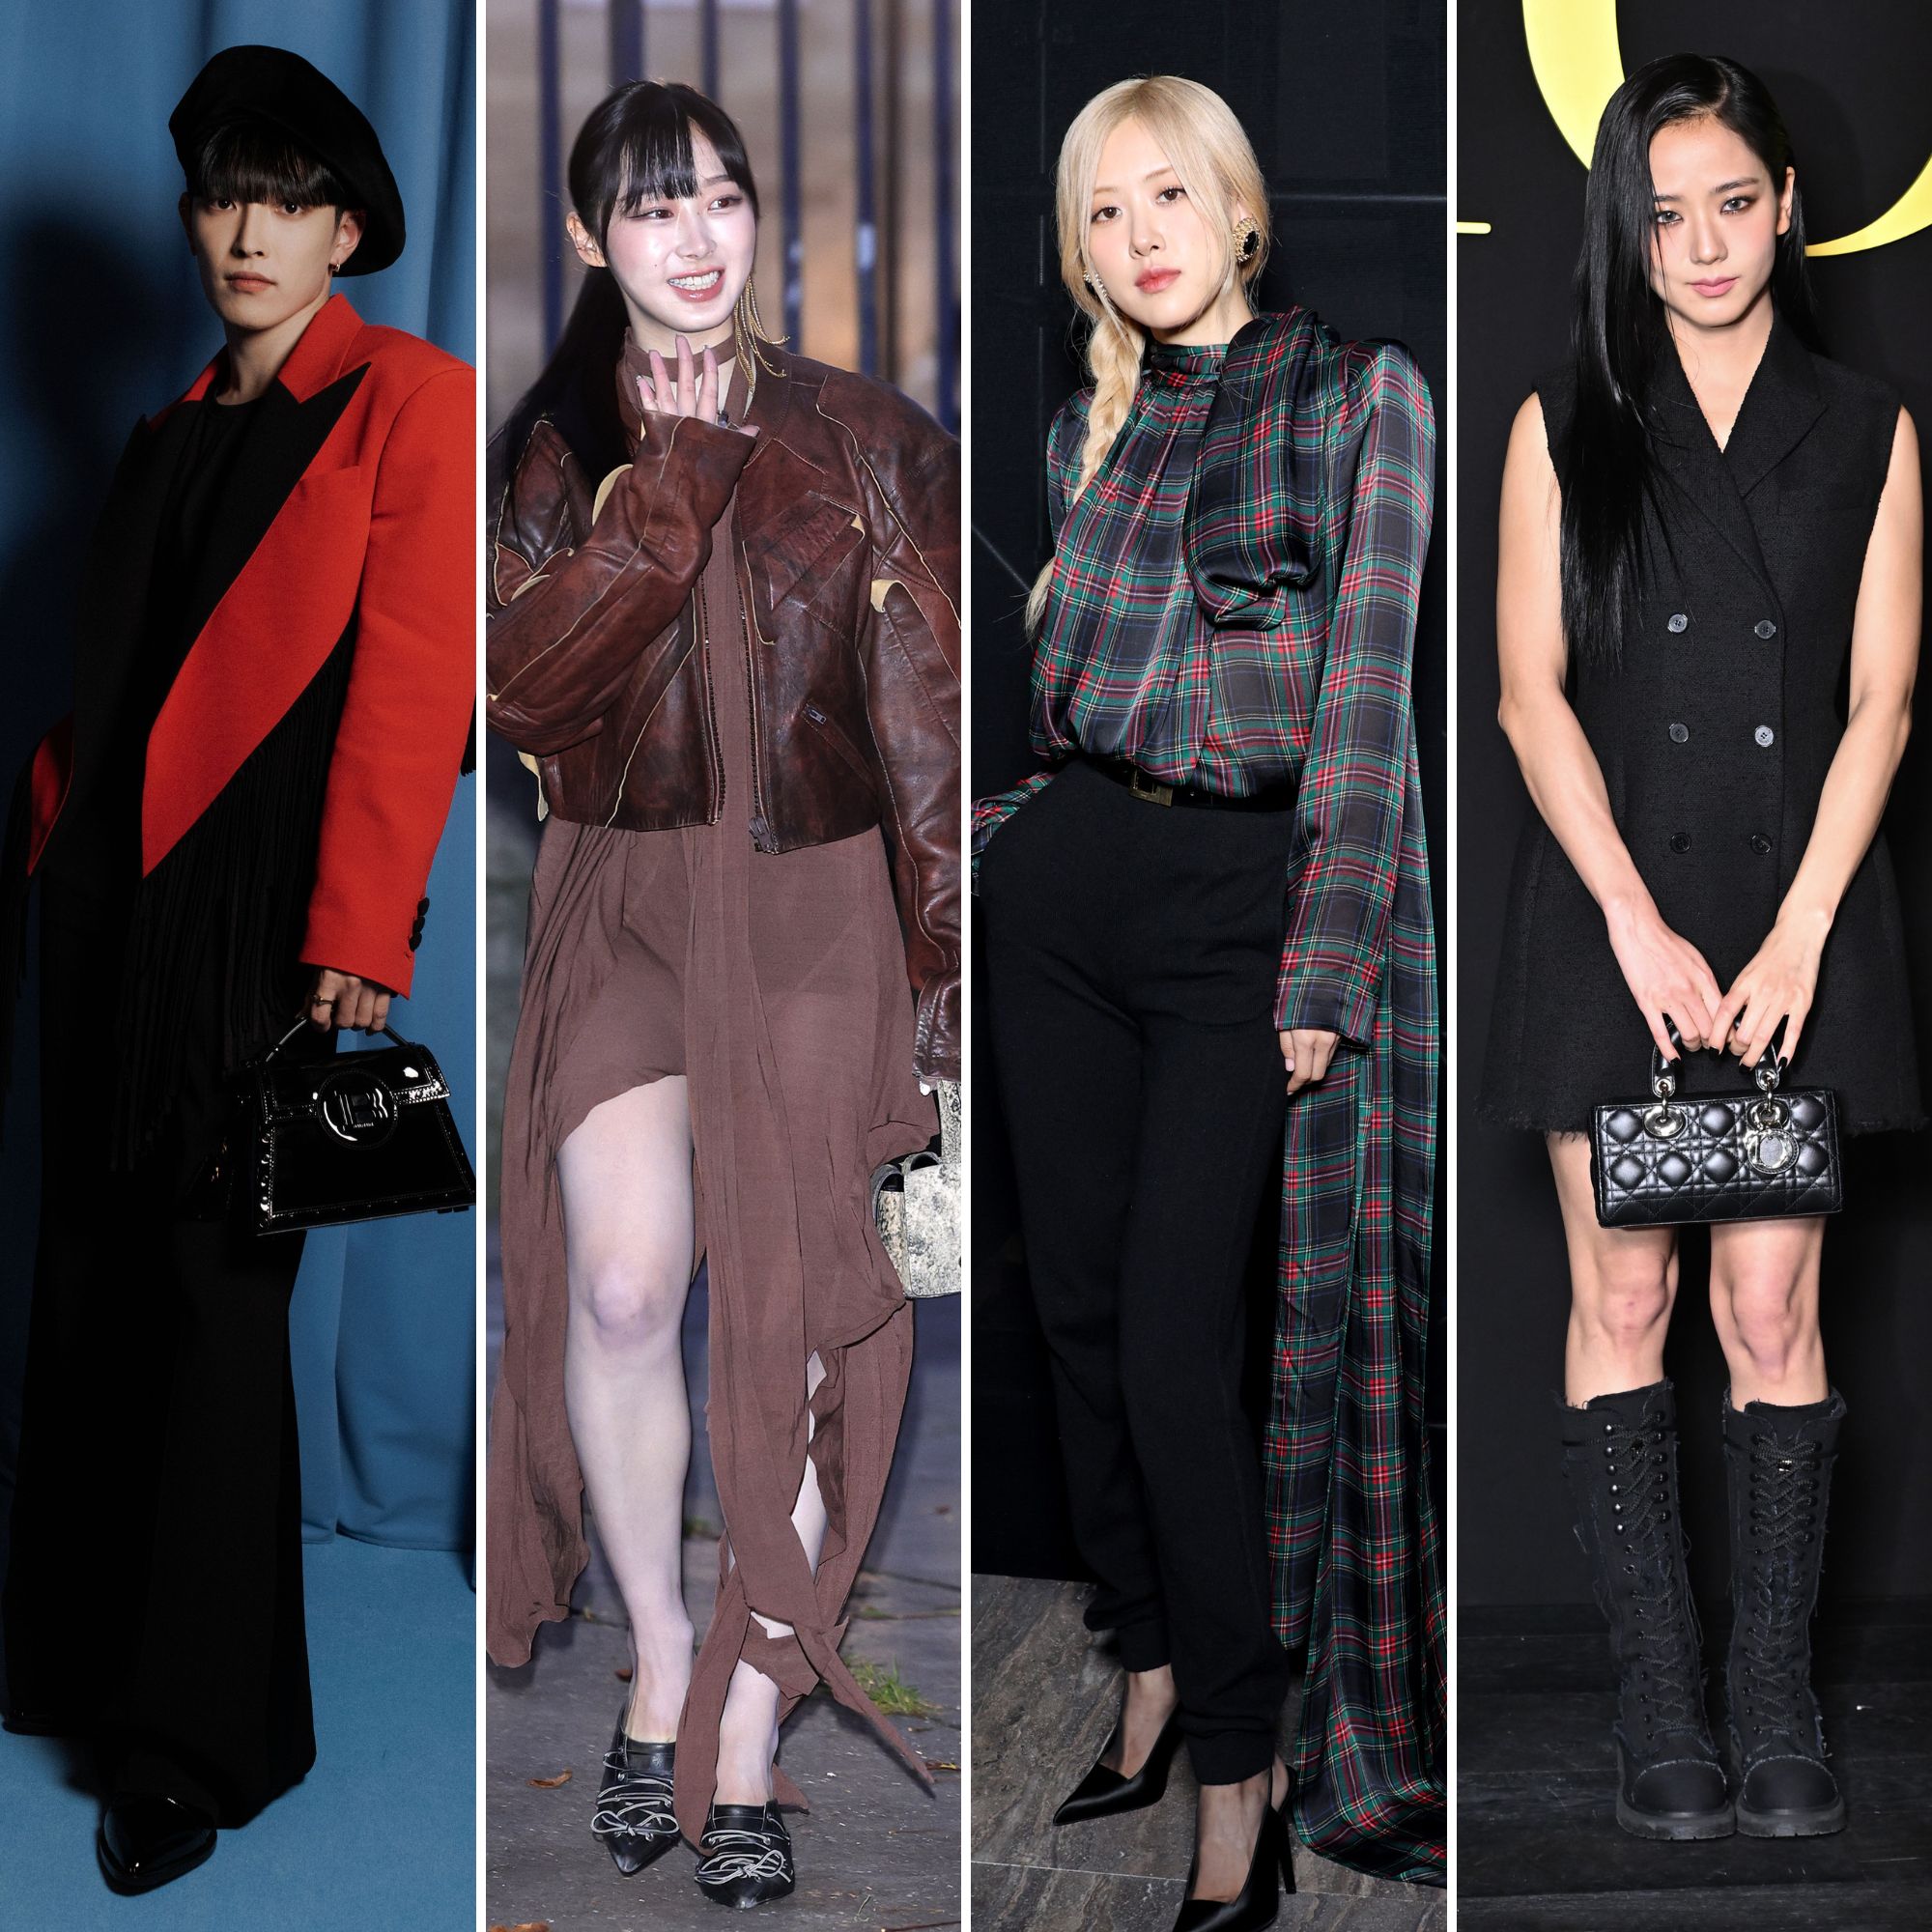 Photos from All the Stars at Paris Fashion Week for Louis